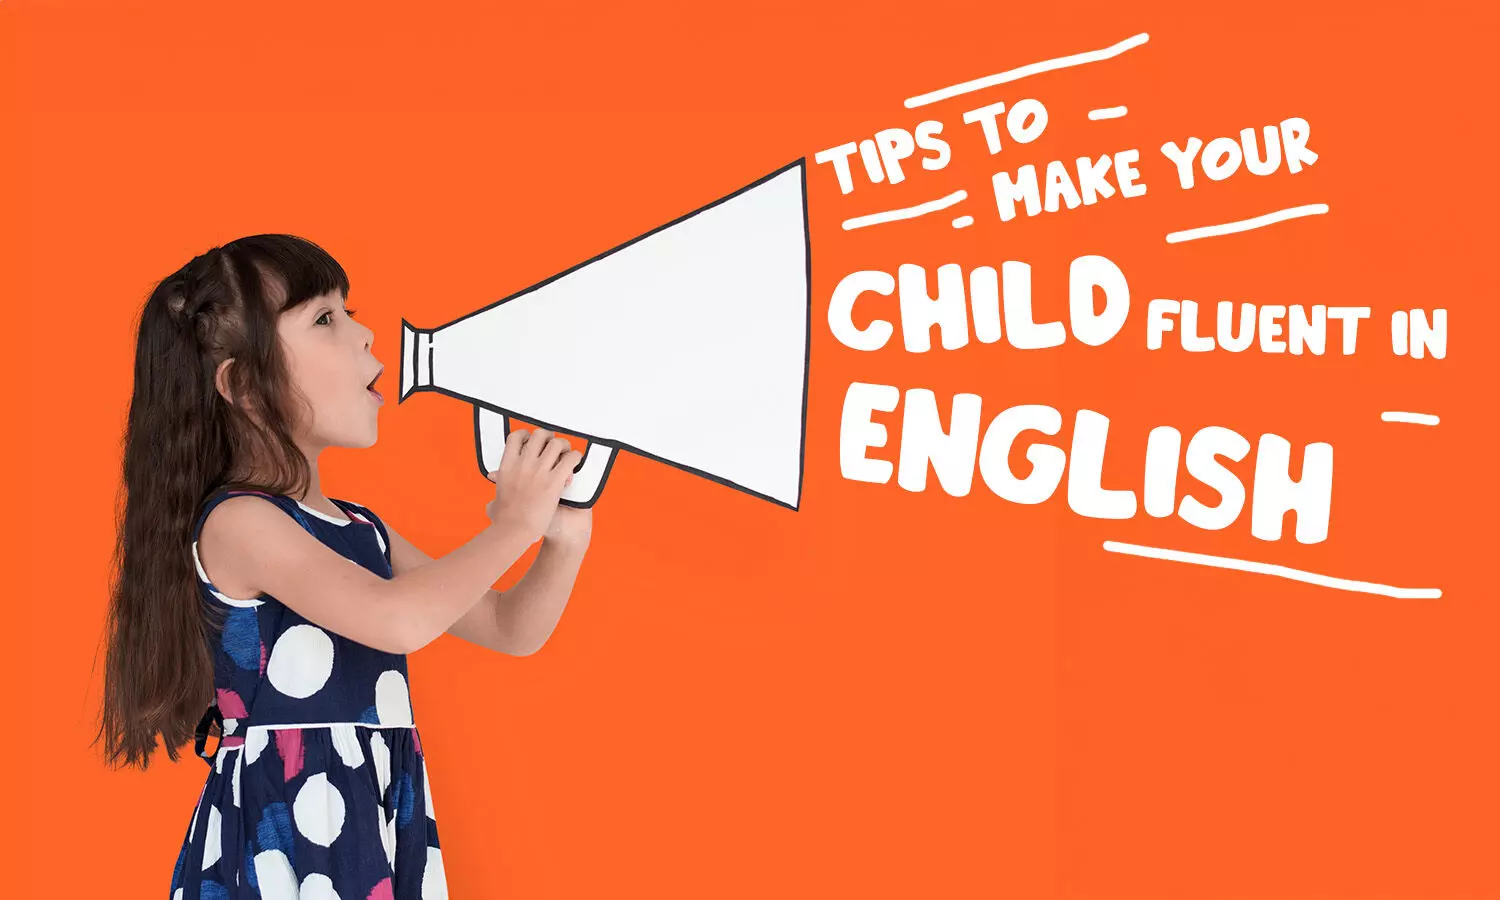 Tips to make your child fluent in English